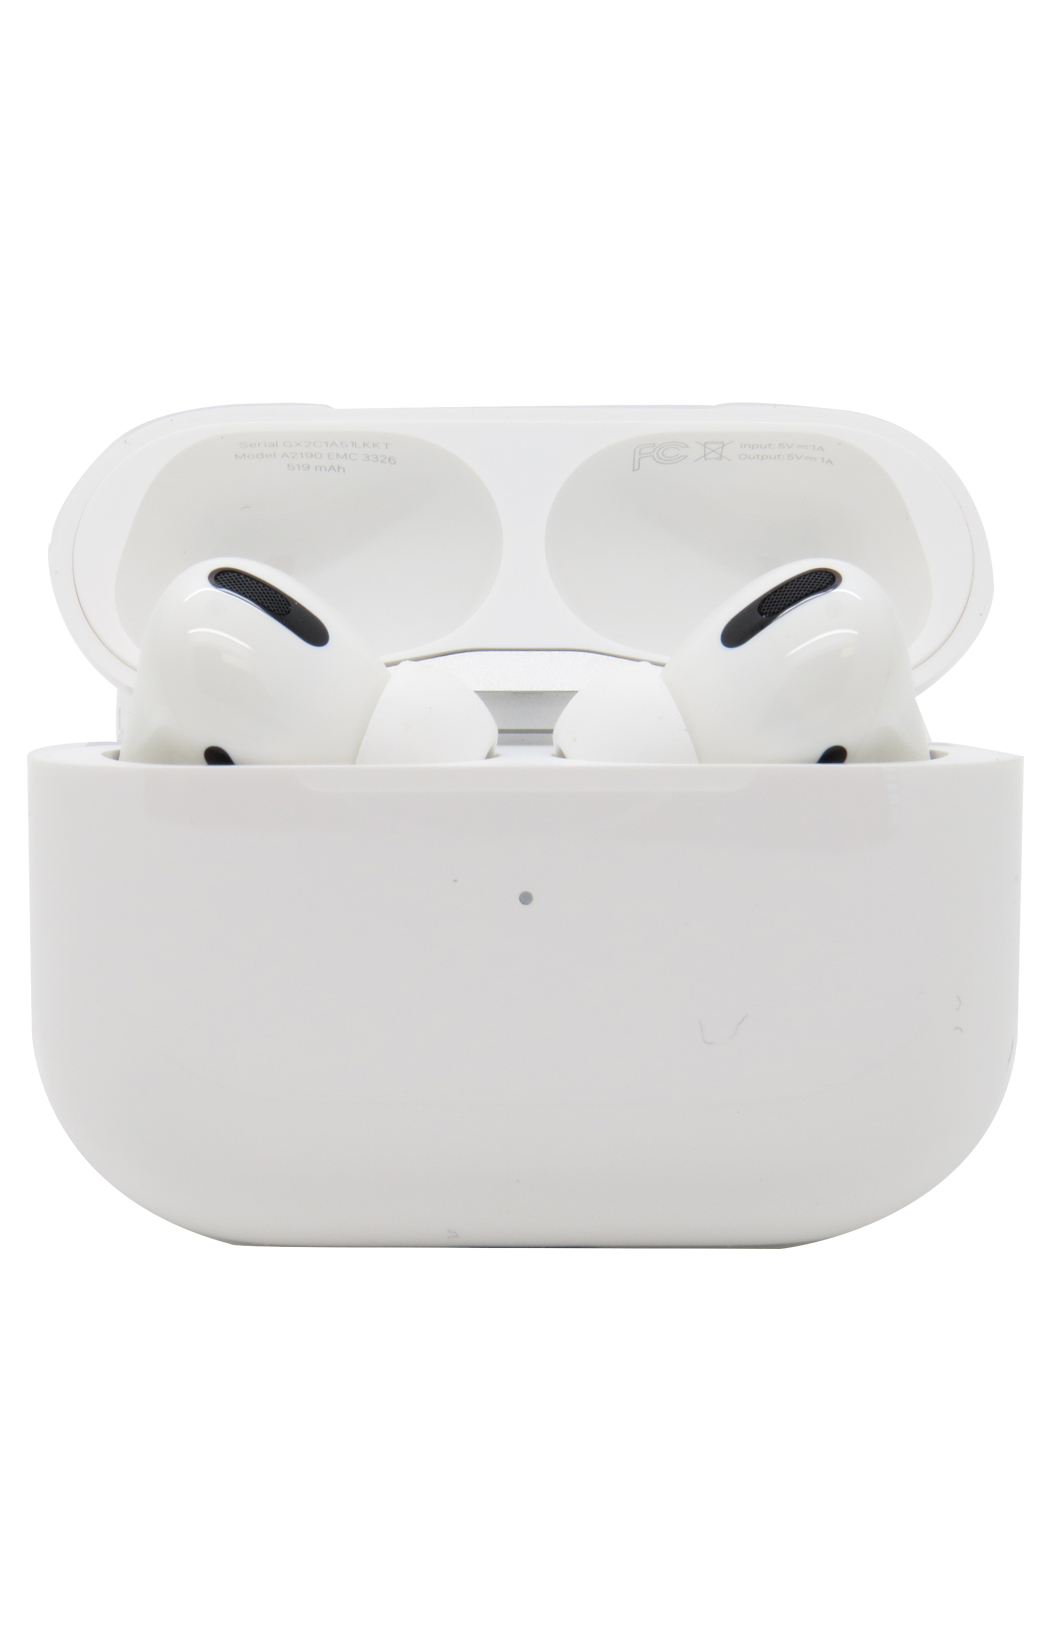 Apple Airpods Pro Wireless Earbuds And Wireless Charging Case White